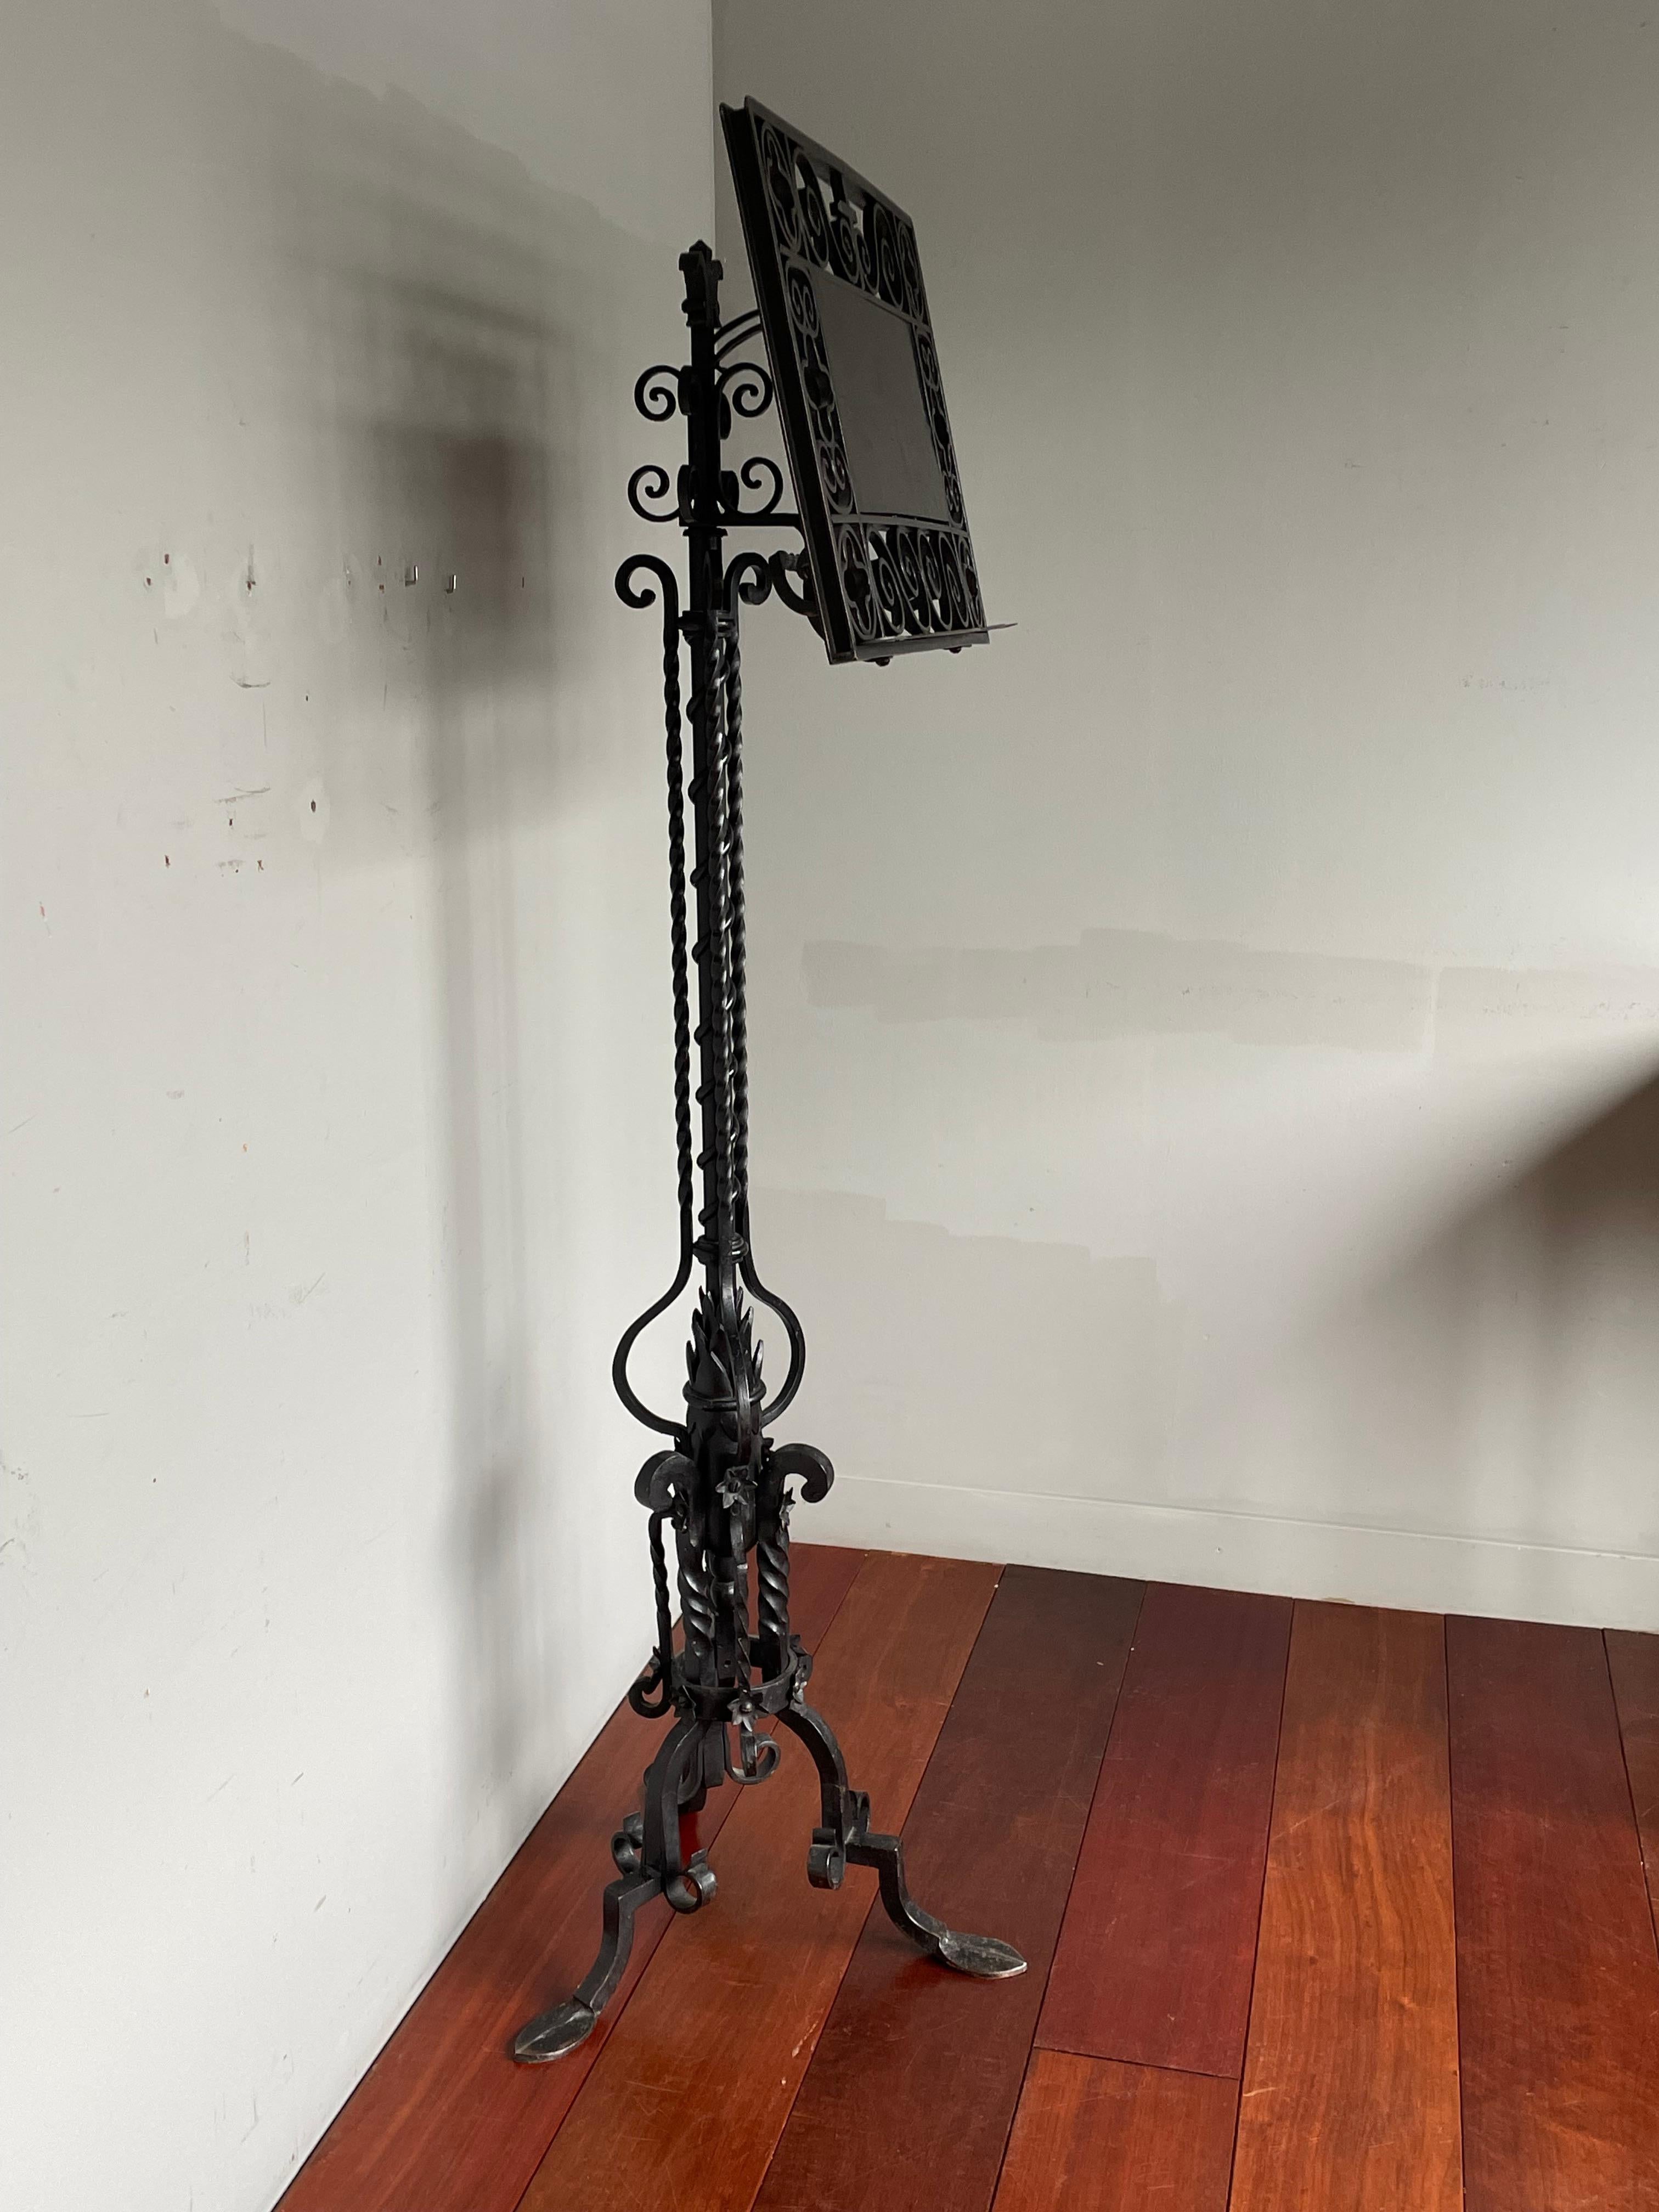 Stunning and one of a kind church lectern / stand for a bible, book or sheet music.

This Gothic Revival church floor stand from the earliest years of the 1900s is another perfect example of the quality and beauty of the handcrafted ecclesiastical